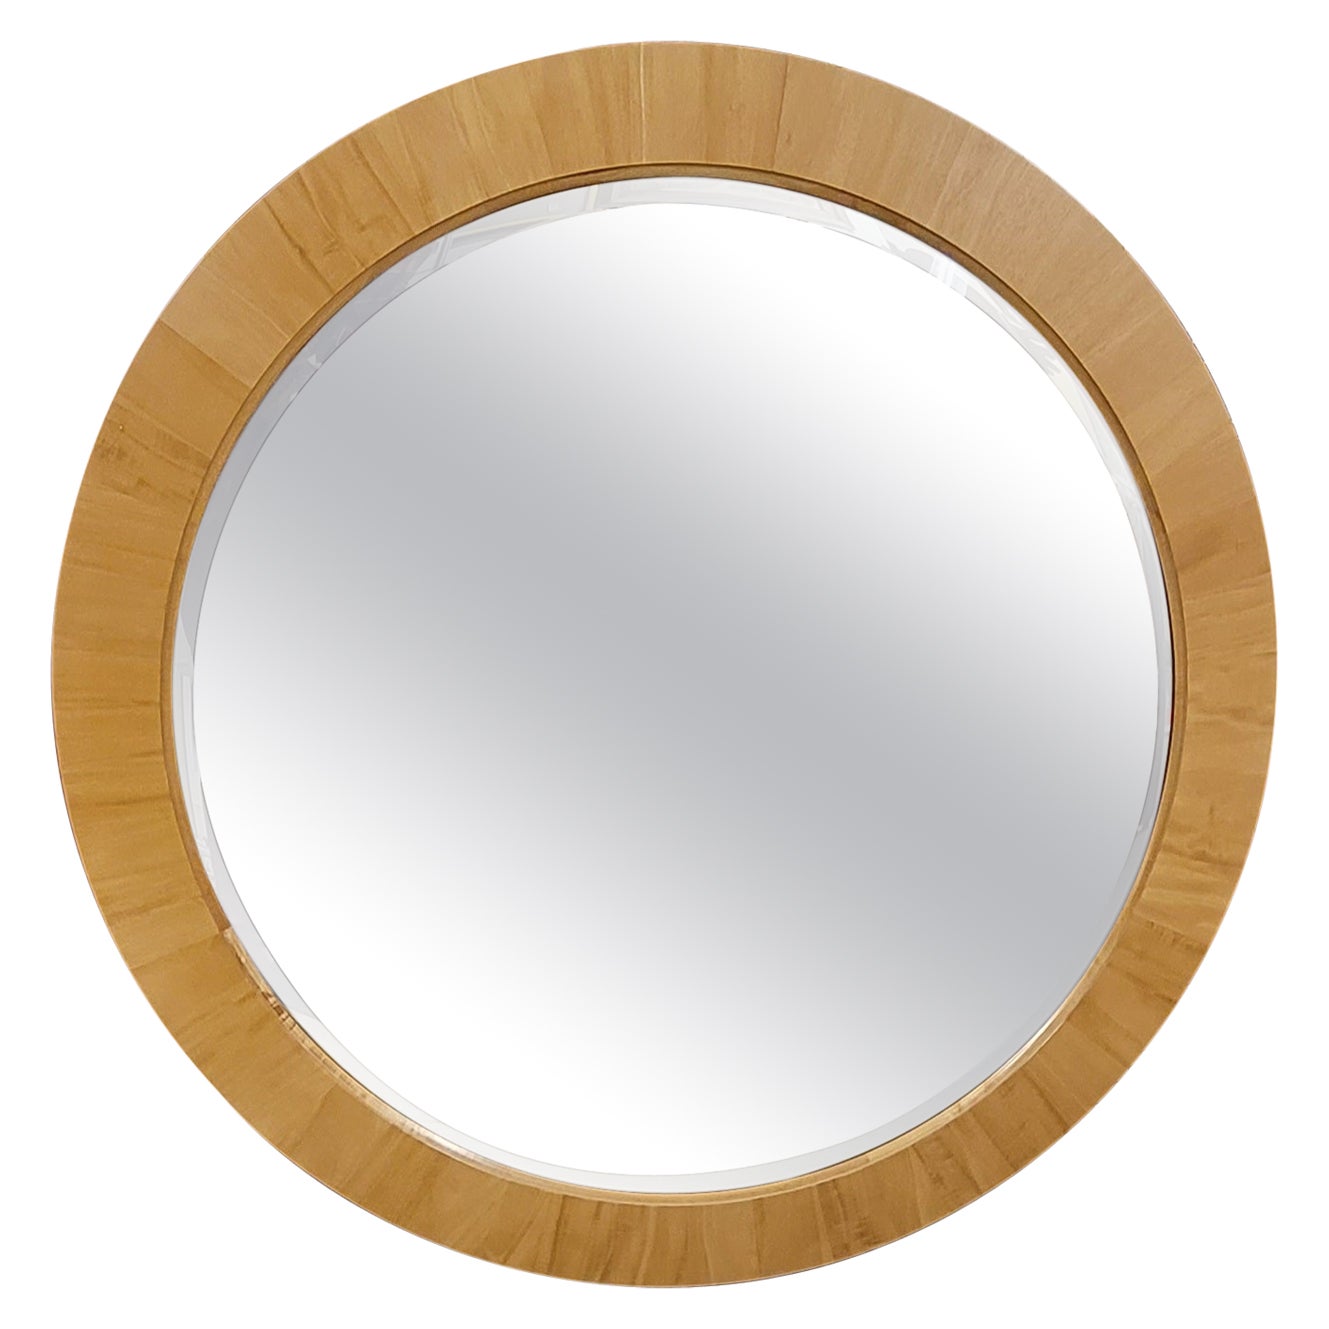 Ethan Allen American Dimensions Collection Round Satinwood Mirror